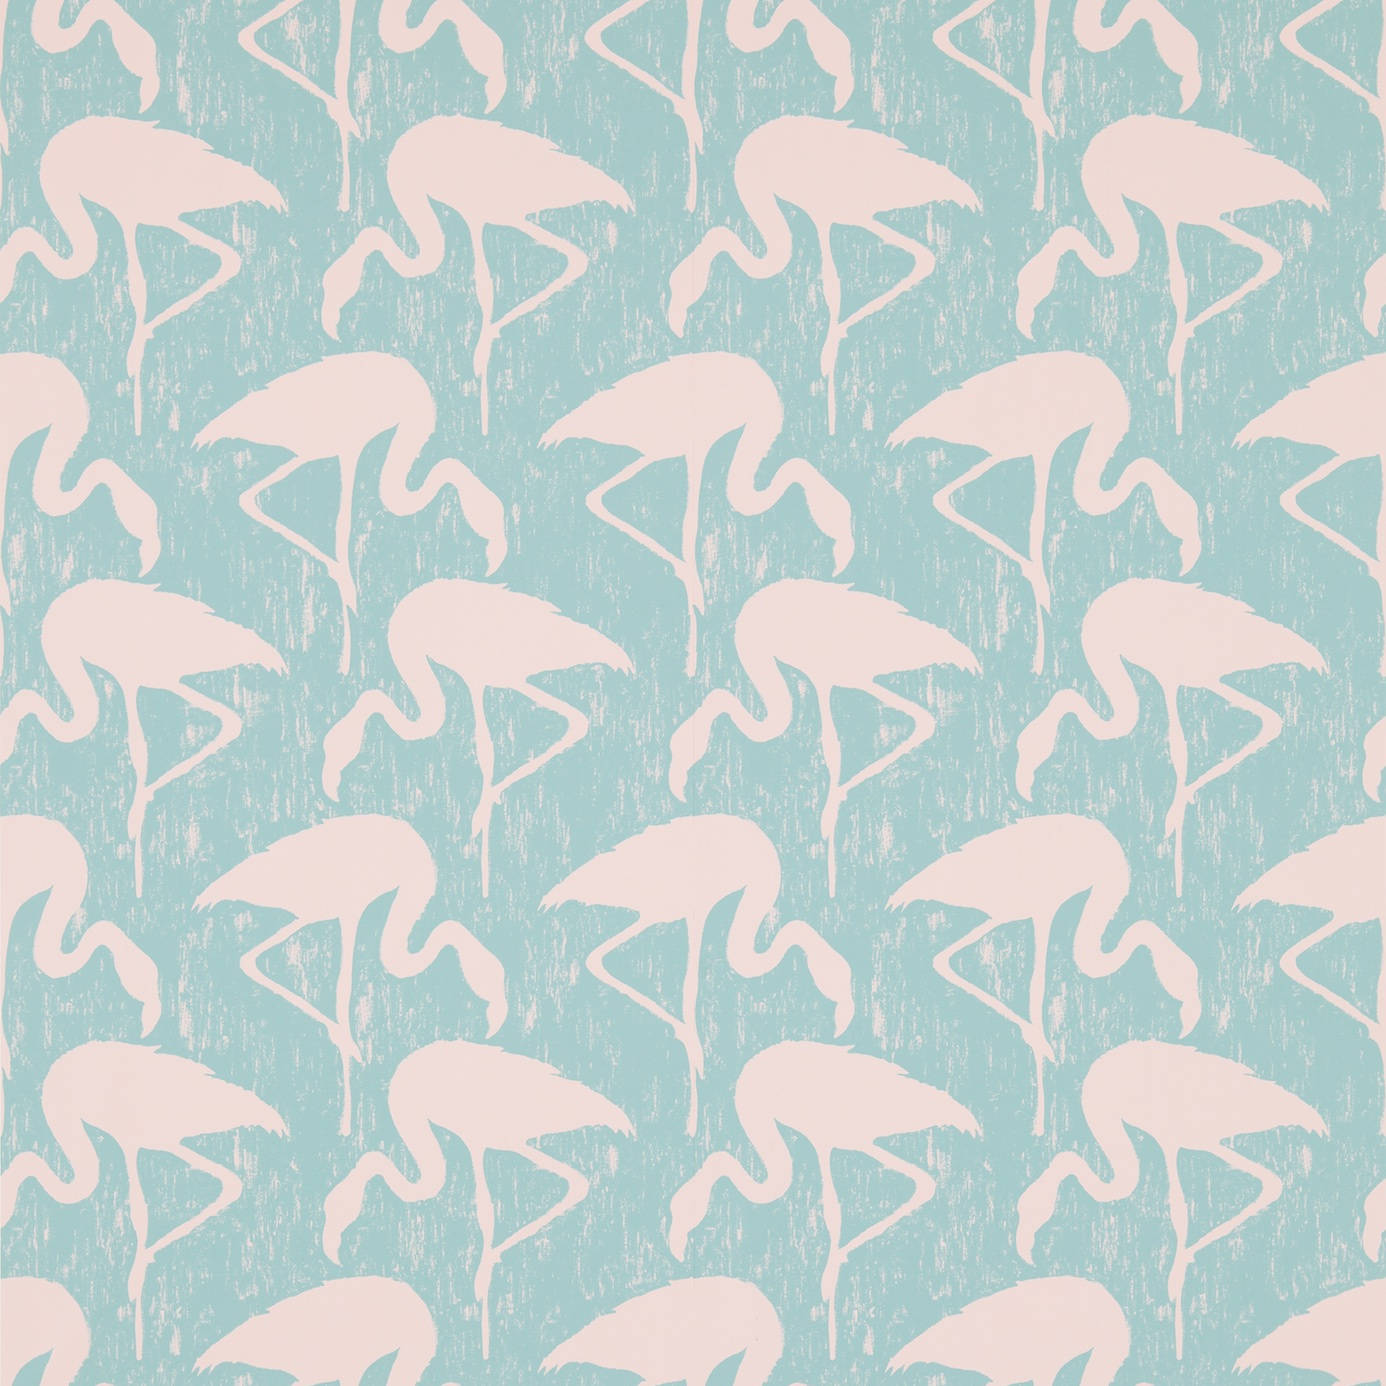 Flamingo 1386X1386 Wallpaper and Background Image